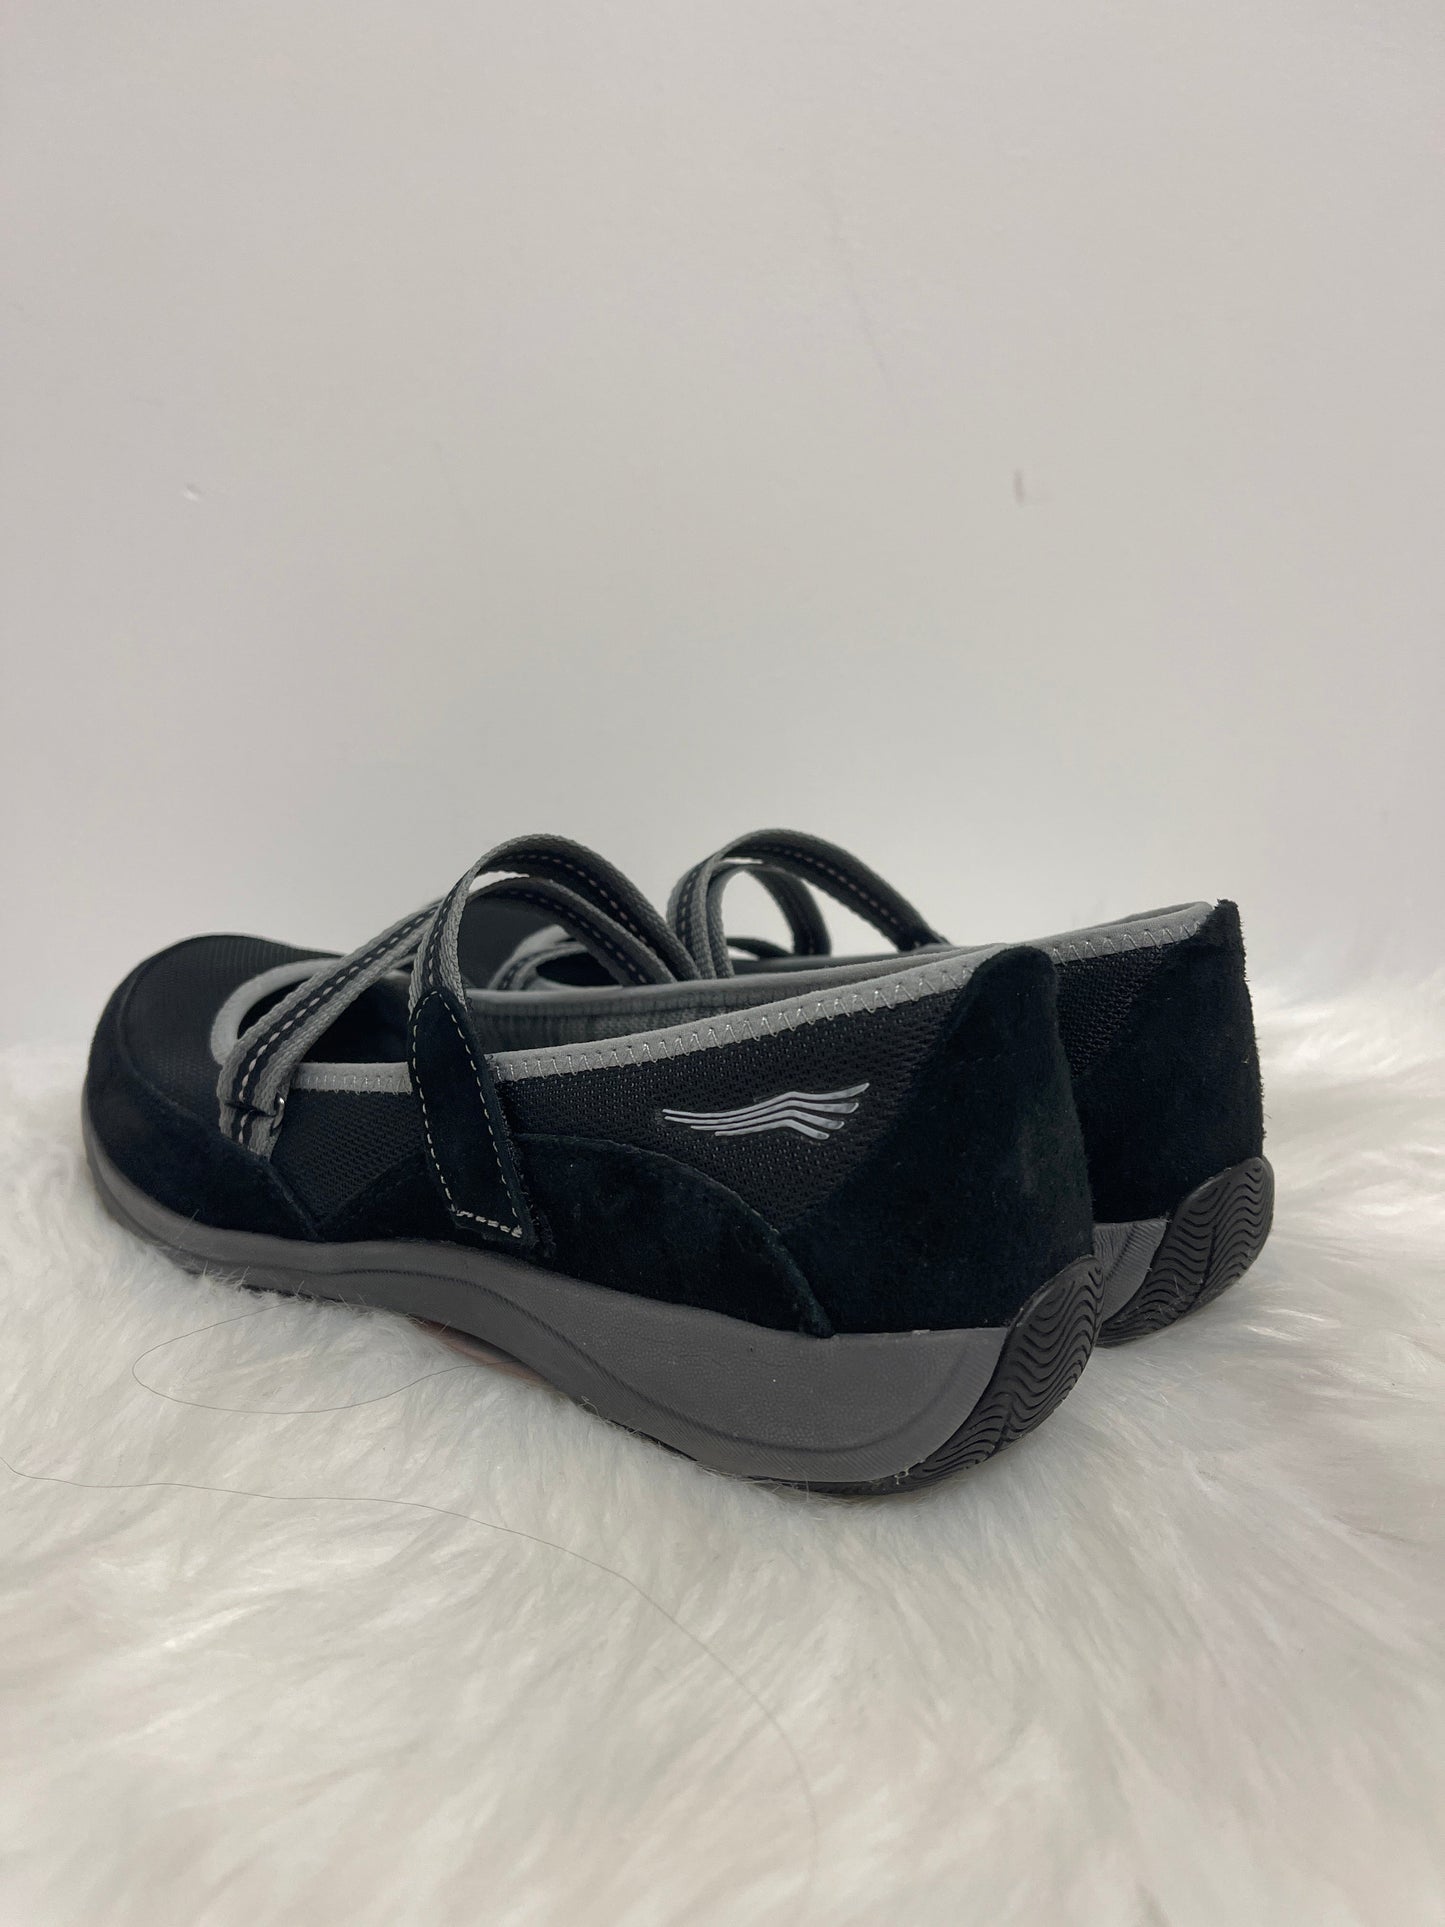 Shoes Flats Other By Dansko  Size: 7.5